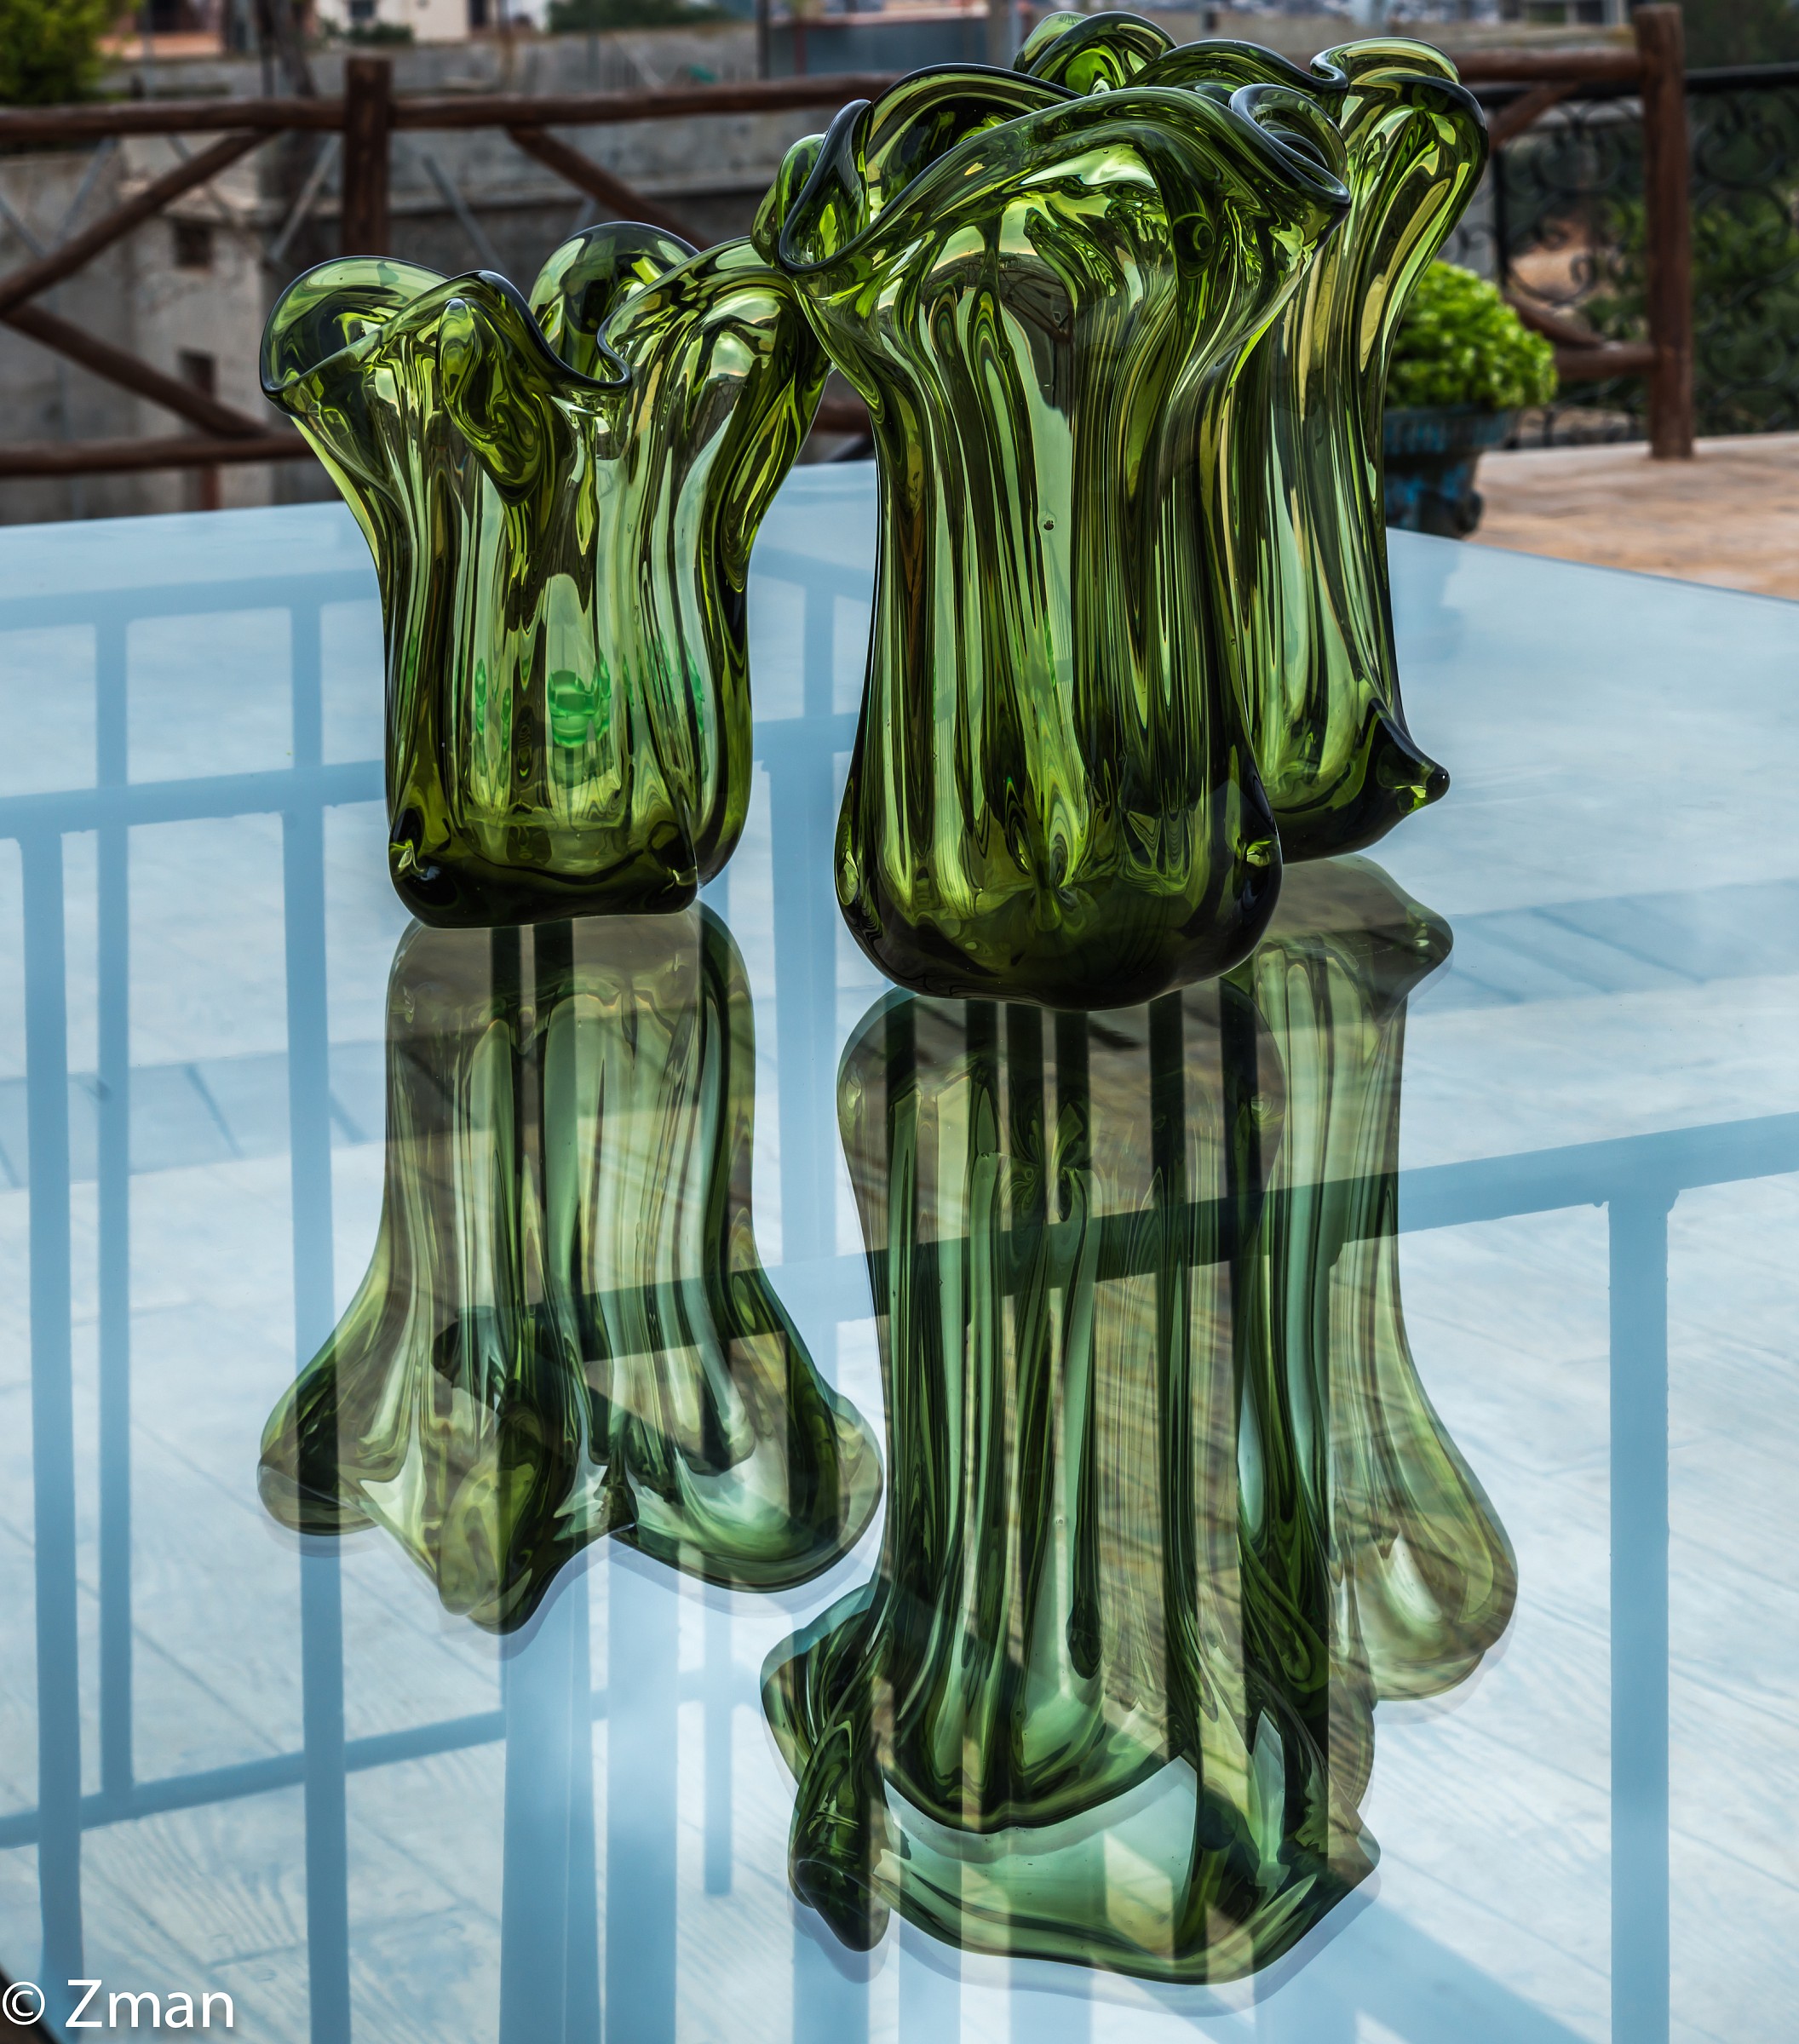 The Green Vases...